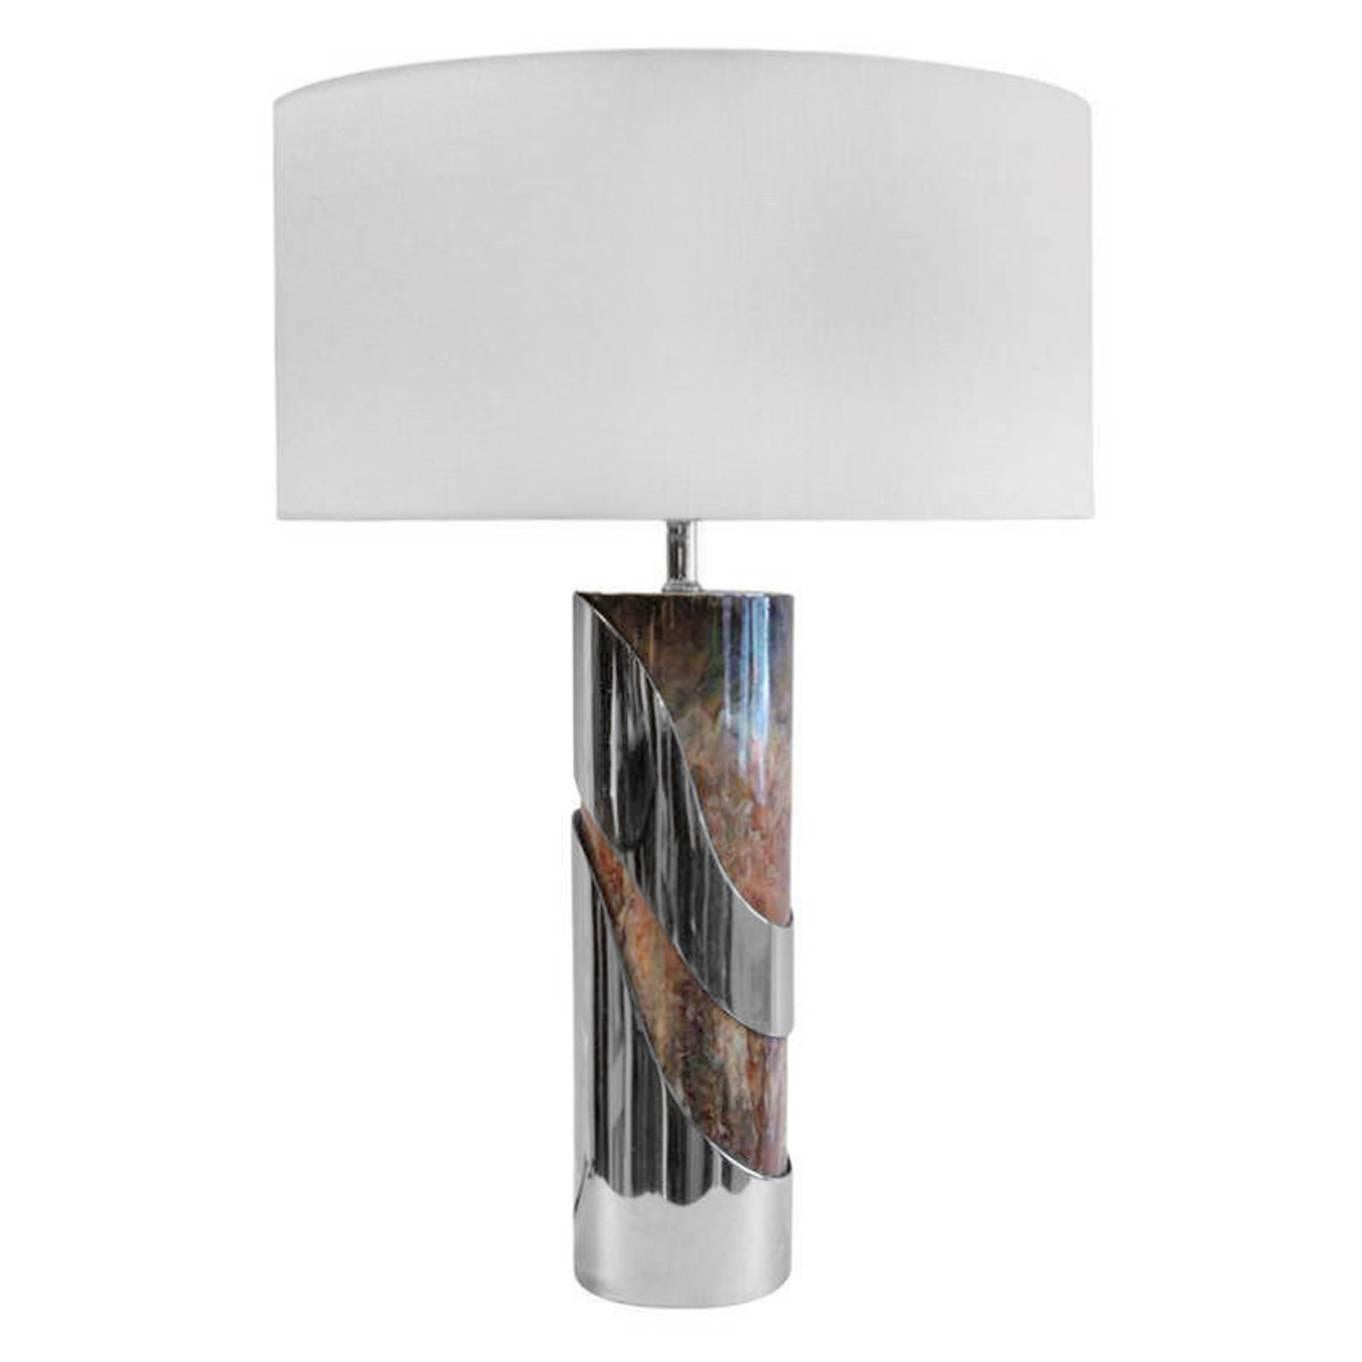 1970s French Curved Chrome and Resin Table Lamp